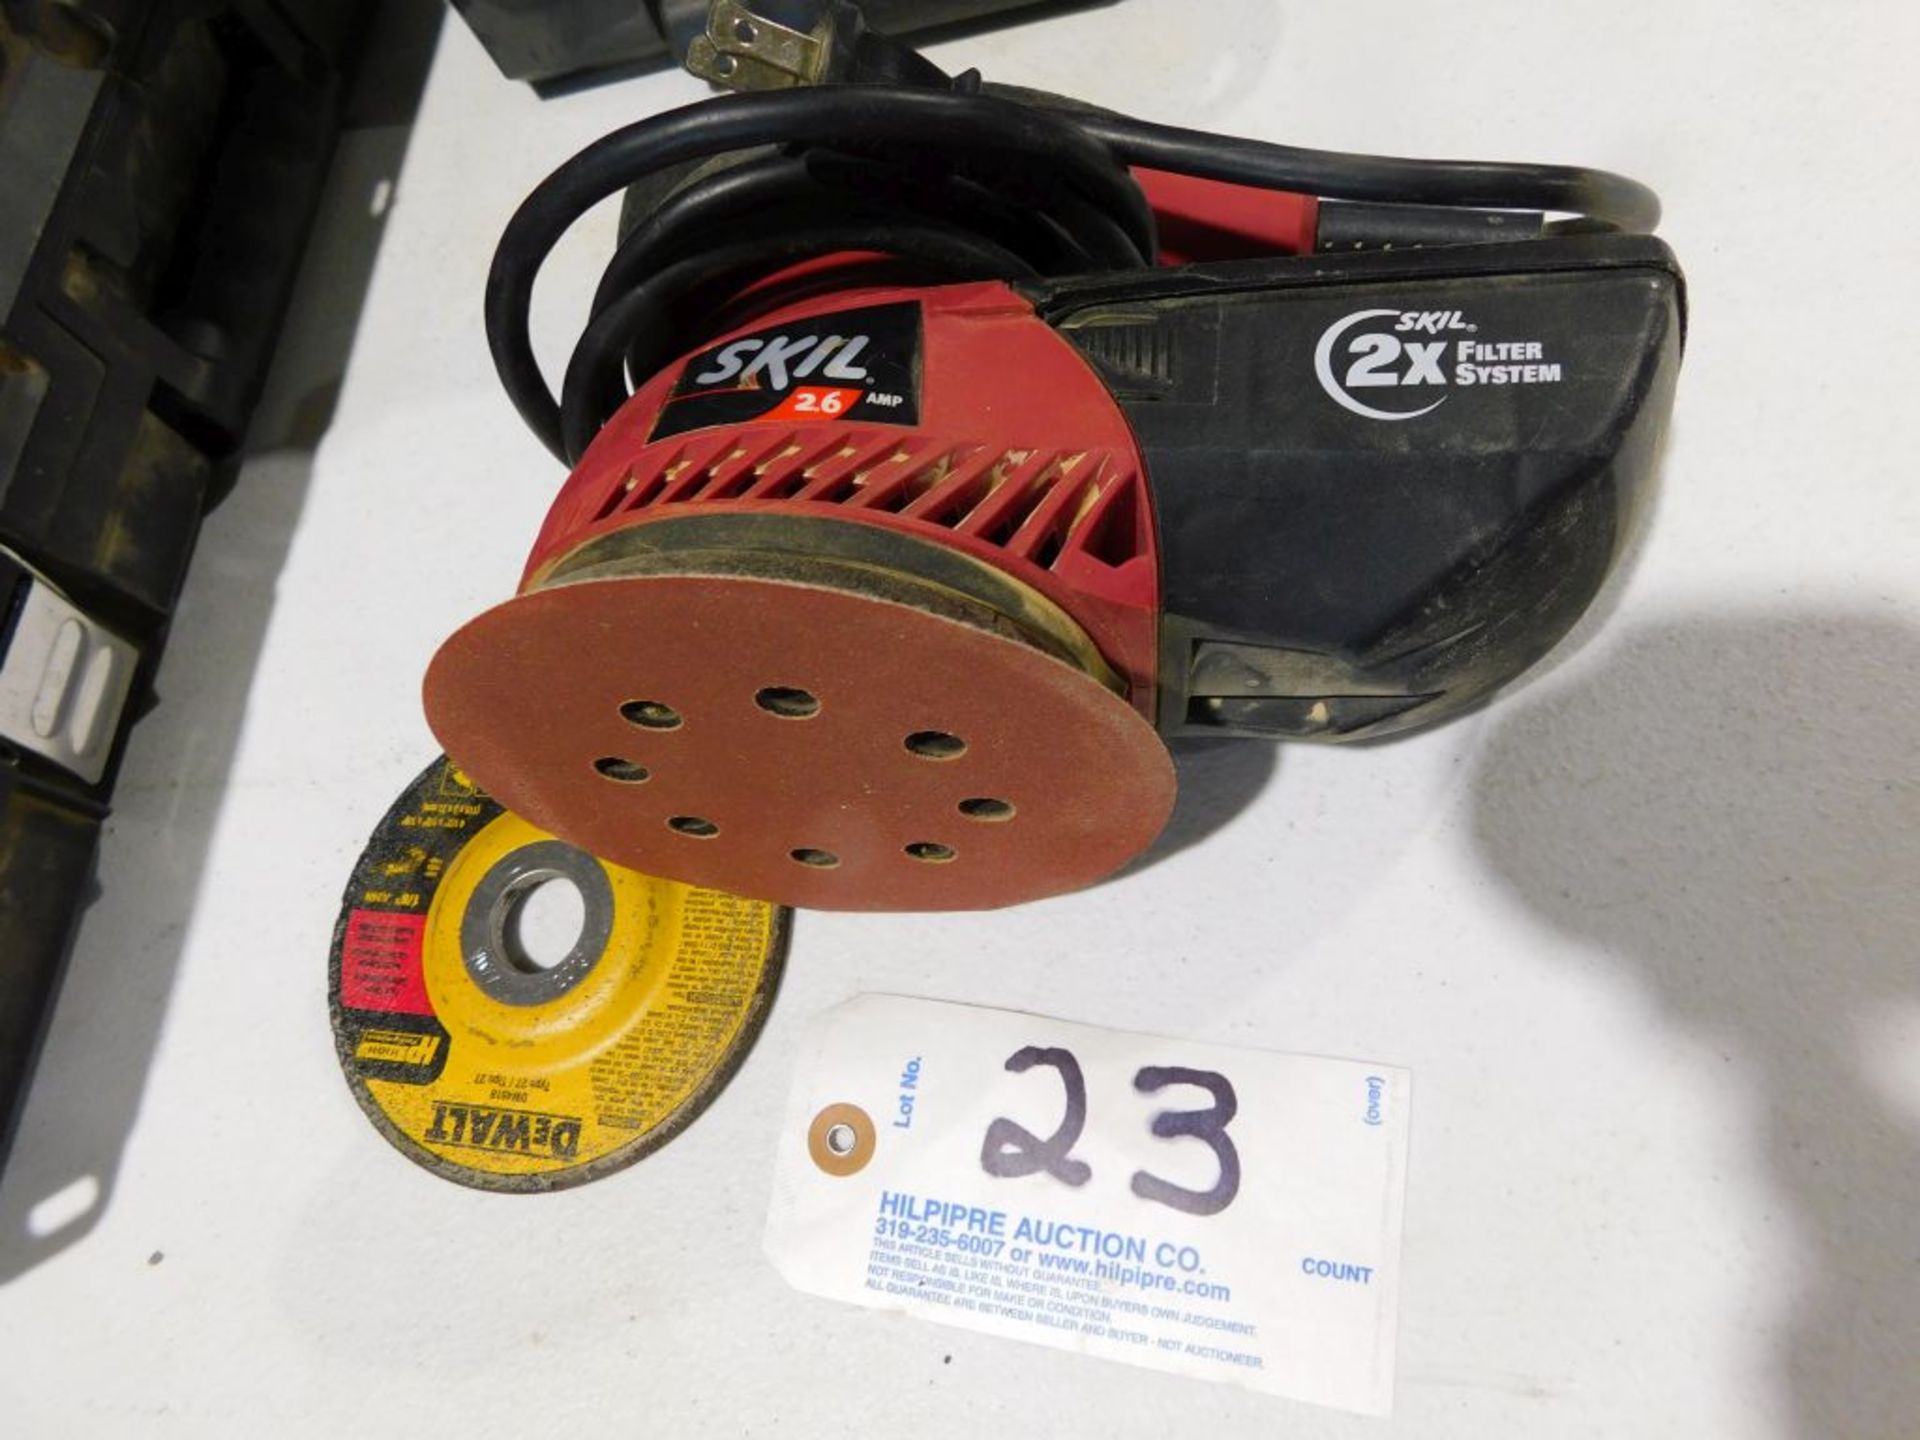 Skil electric sander, 2X fileter system. (Located at and to be picked up at: 2862 Wagner Rd.,